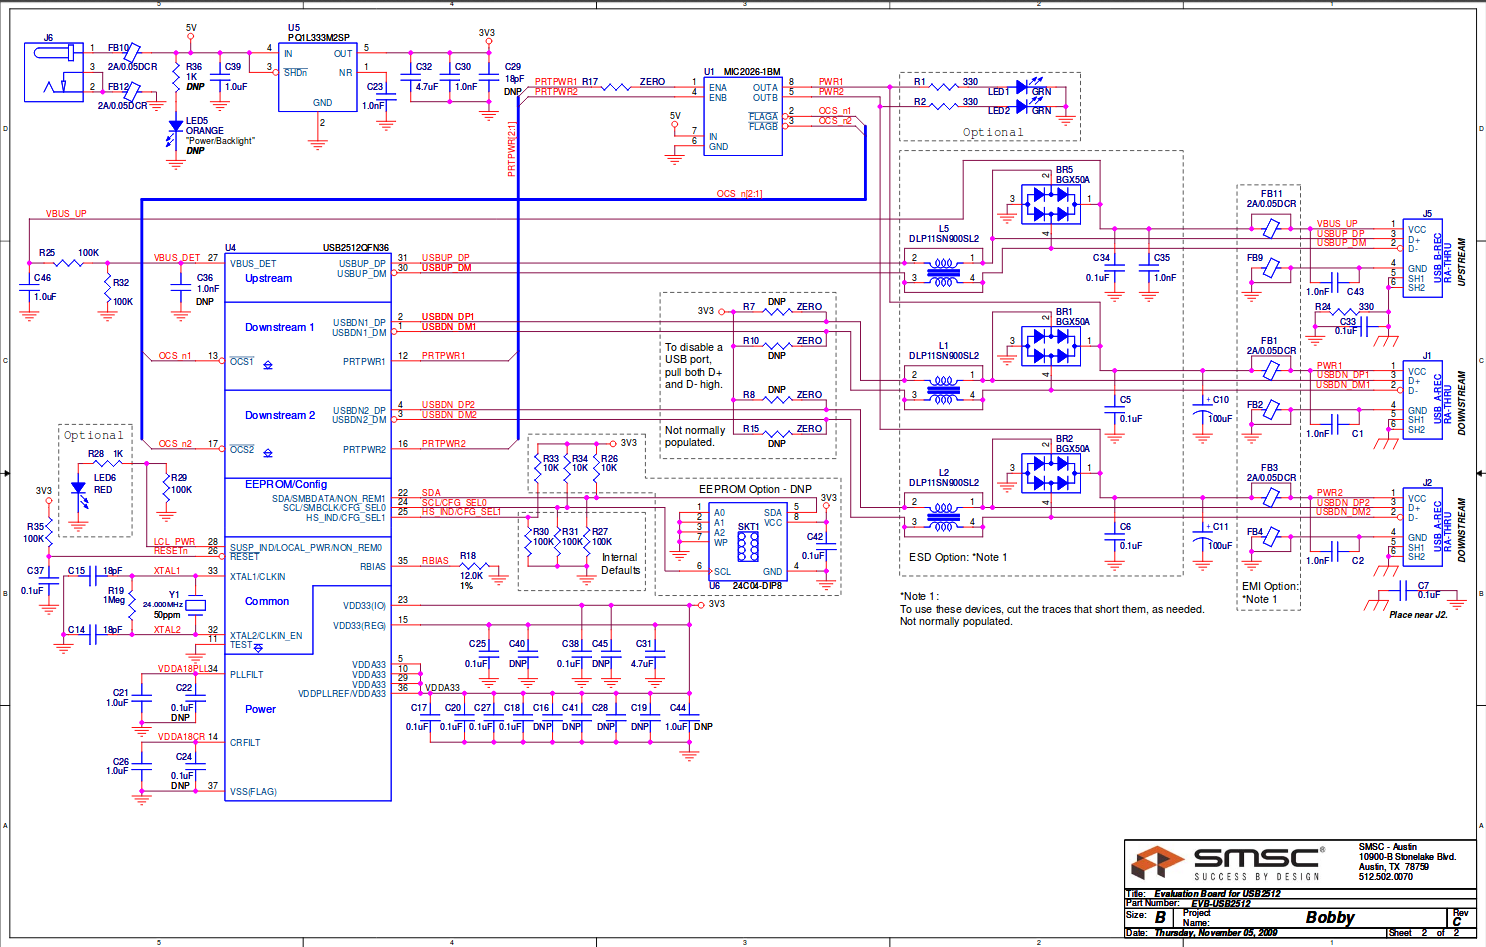 Schematic of evaluation board for USB2512